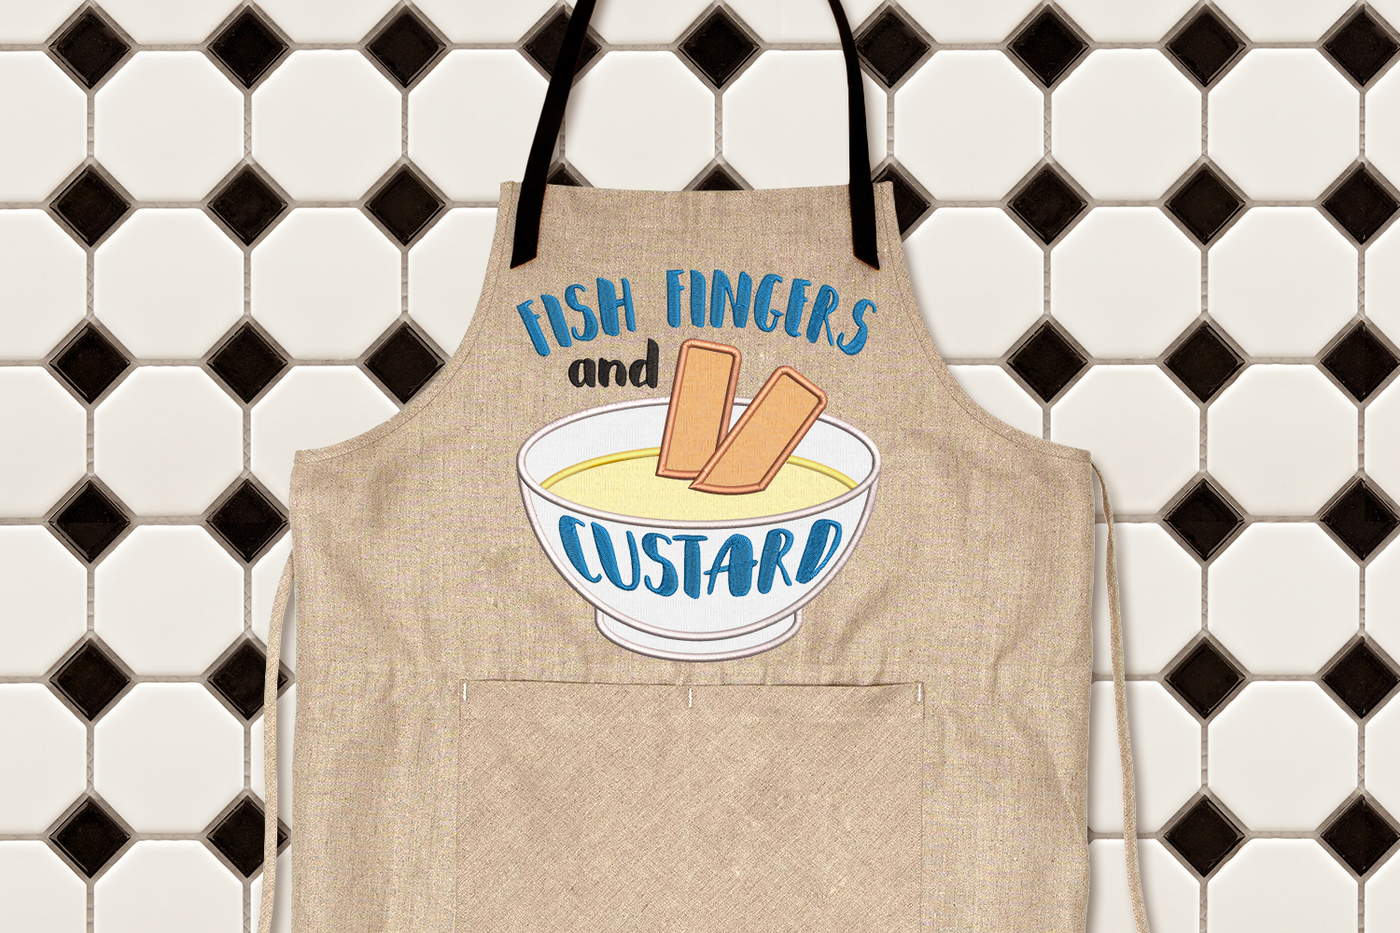 Apron with embroidered words saying "Fish fingers and custard." There is an applique of two fish sticks in a bowl of vanilla pudding.